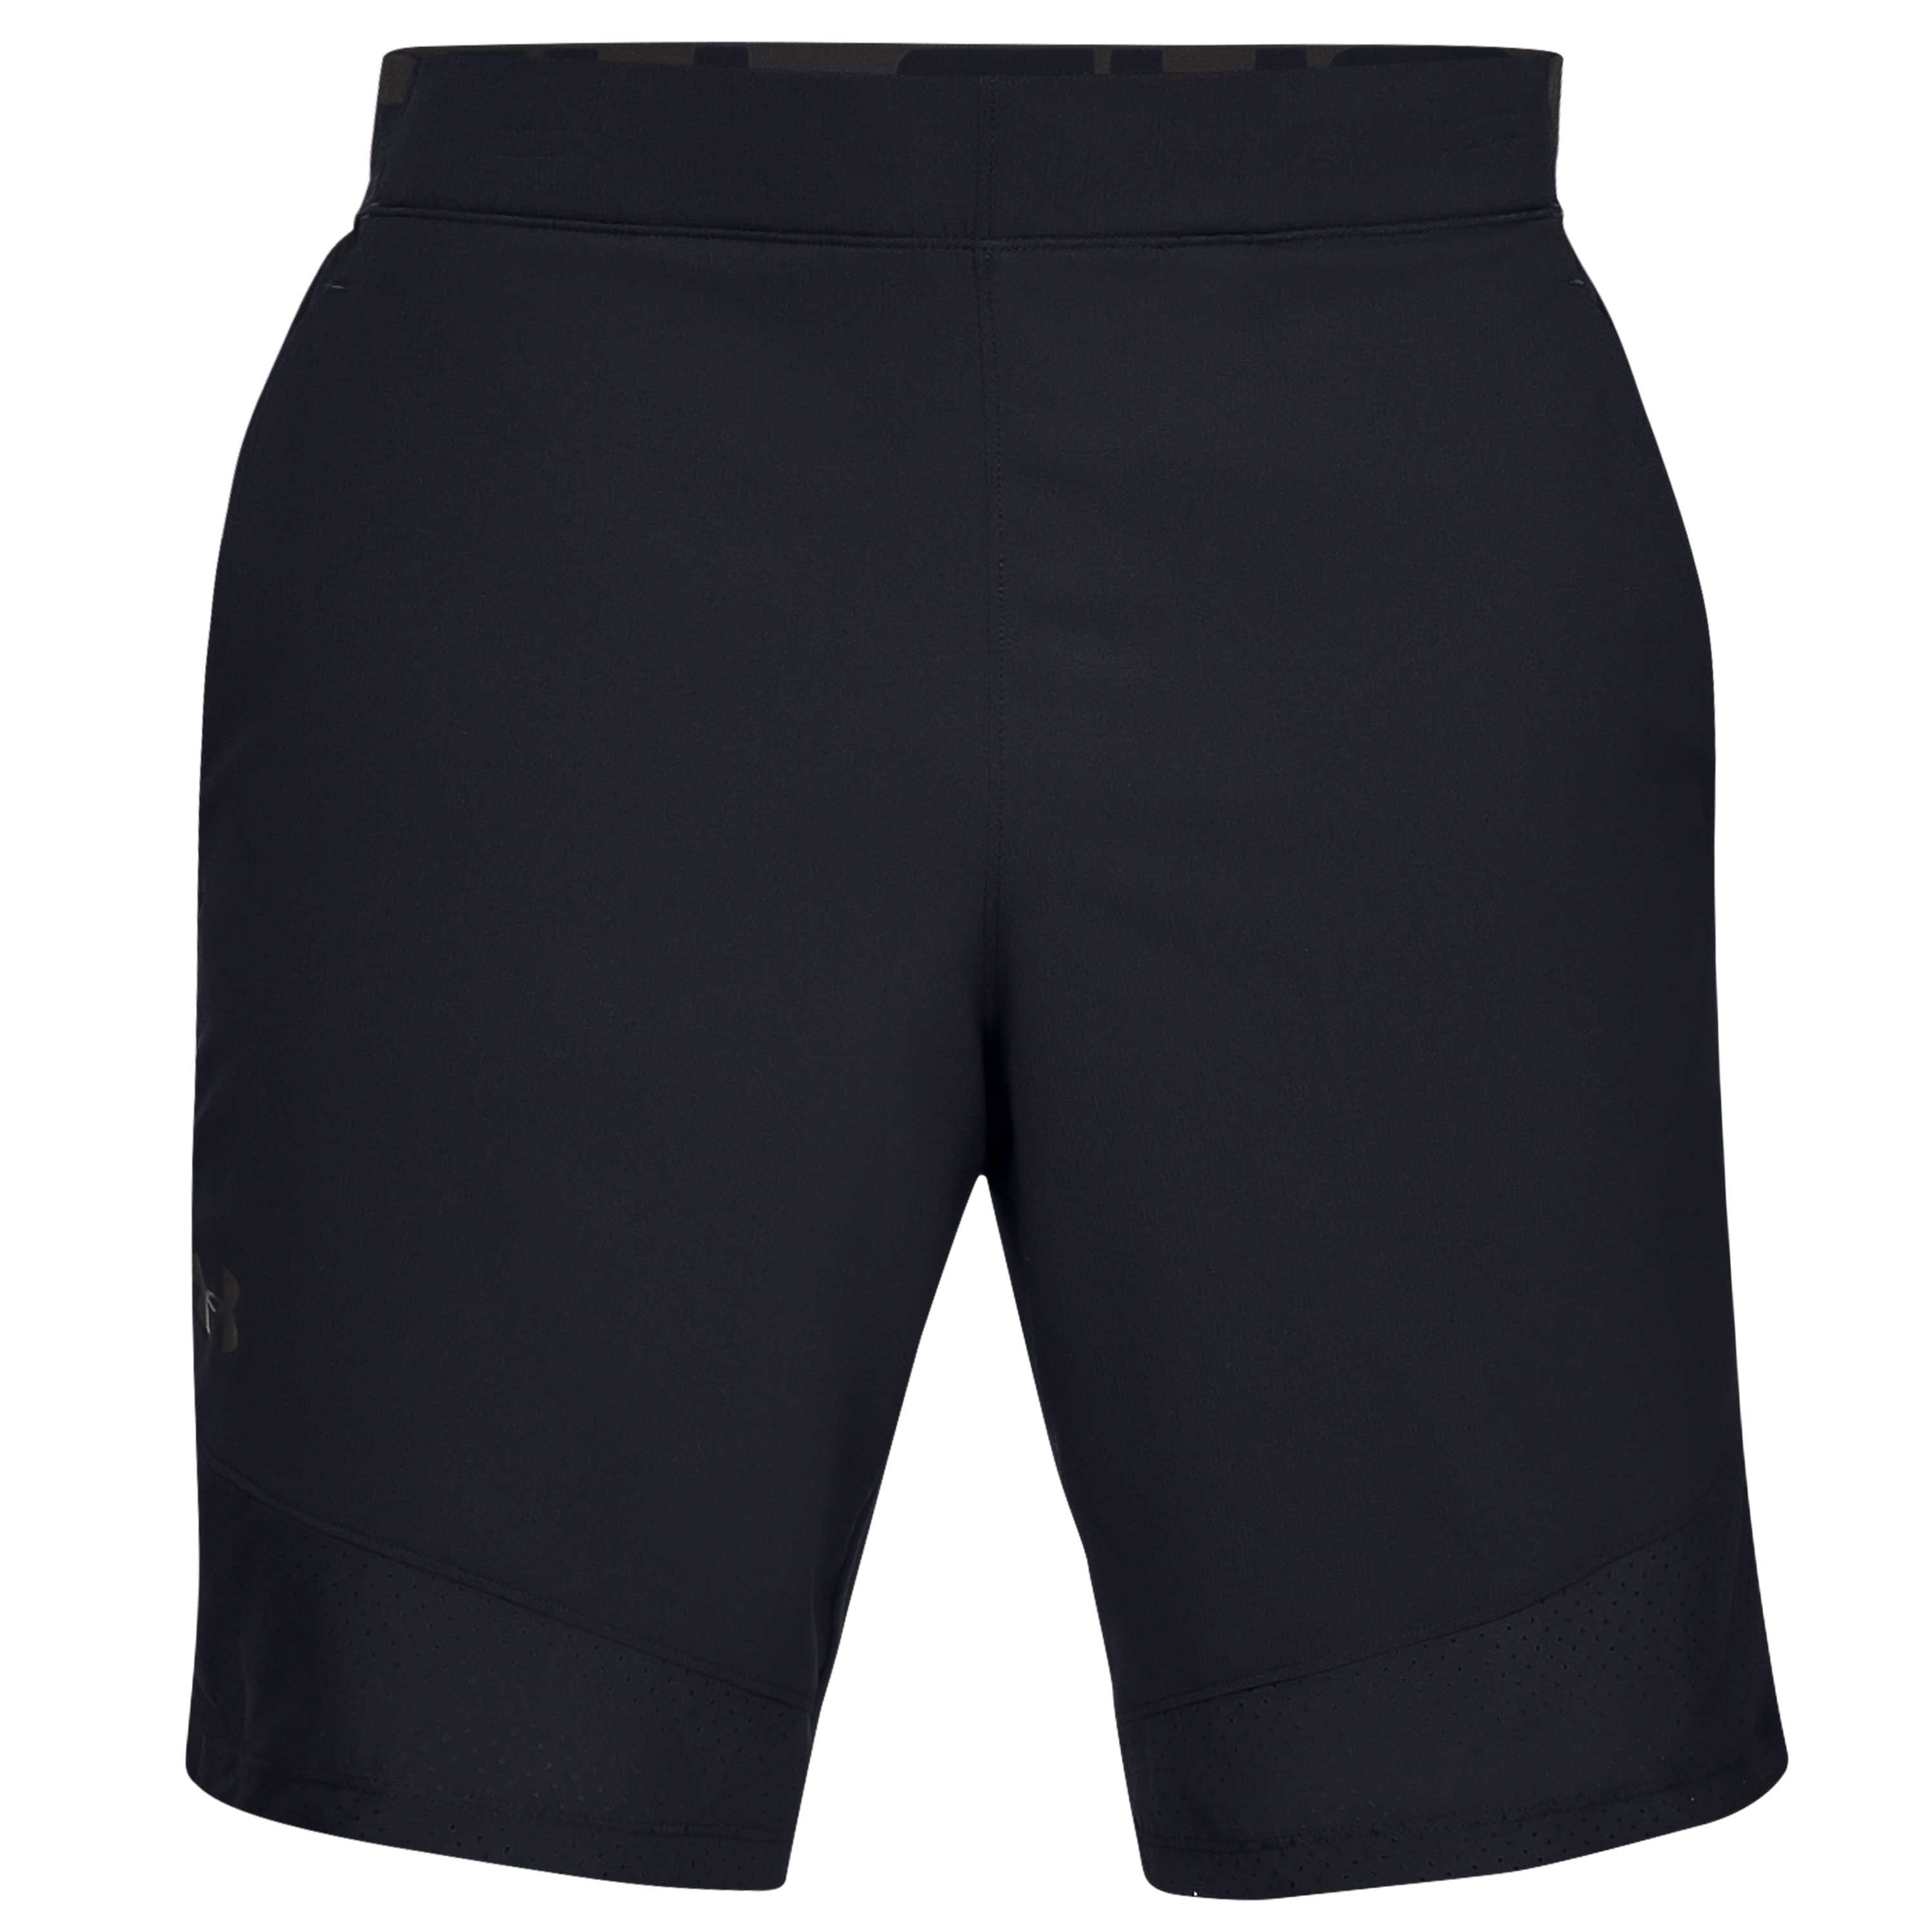 fitted under armour shorts